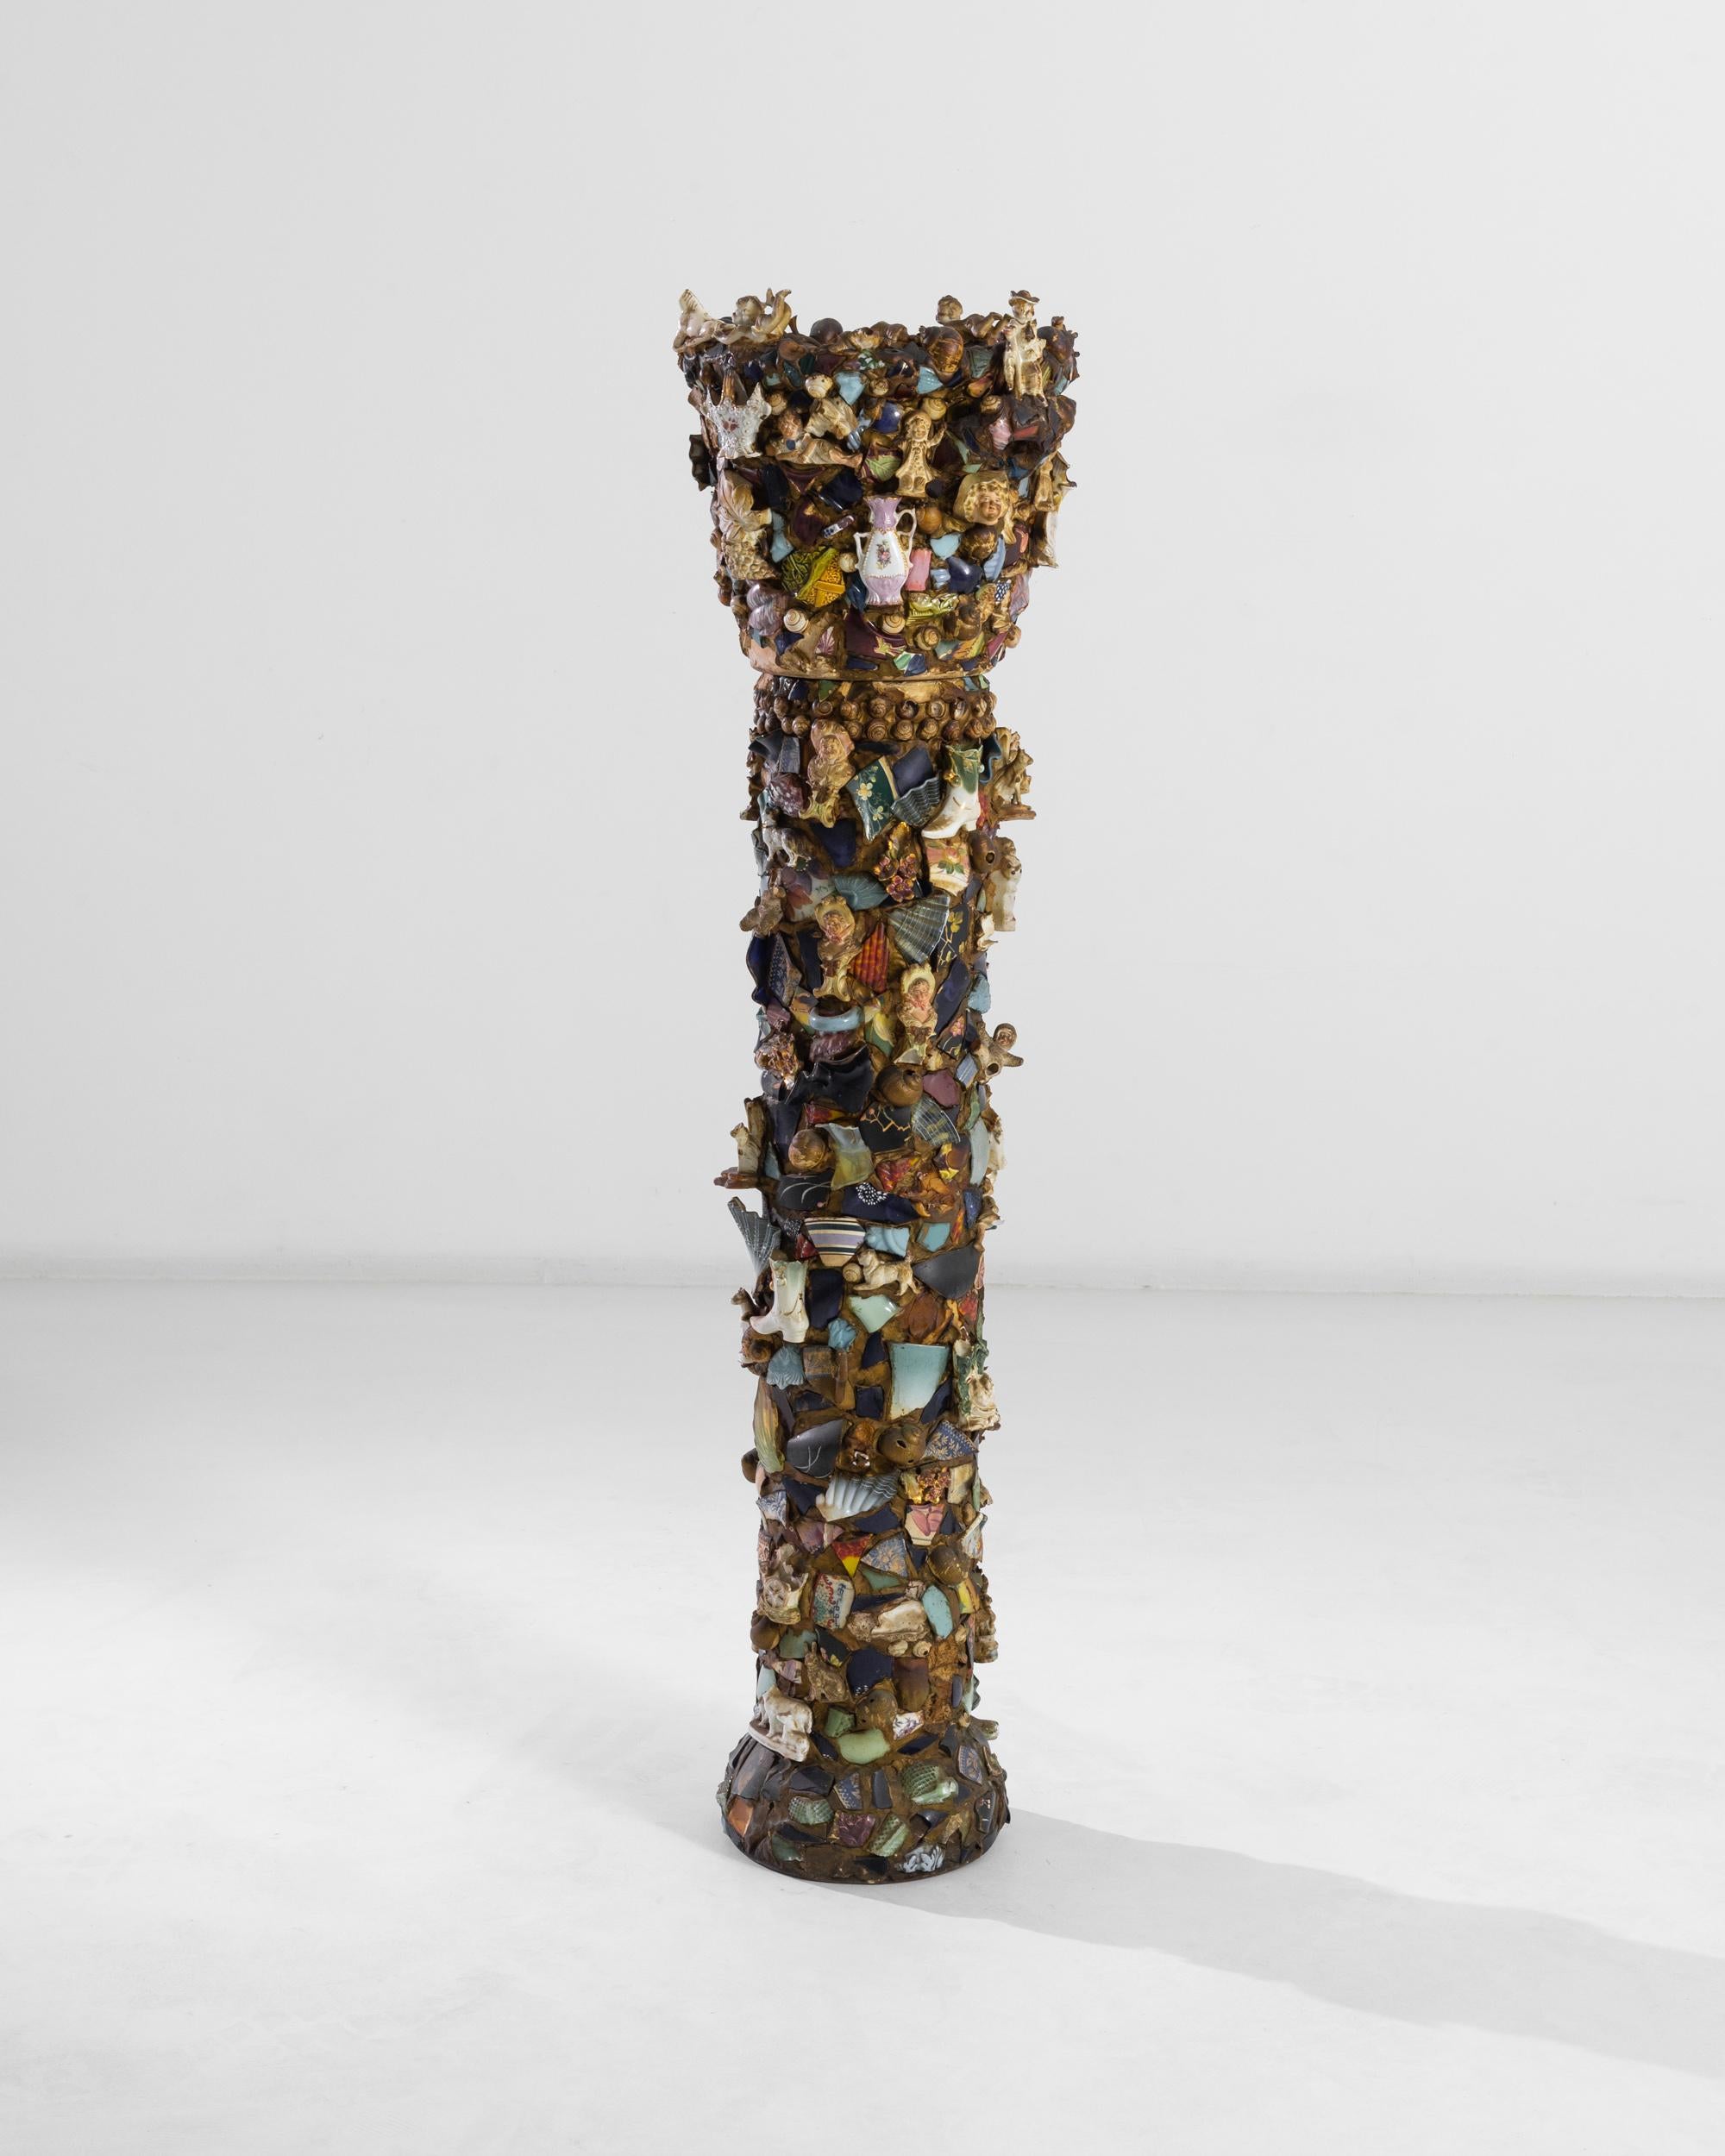 A 20th century column created in France, this two part piece consists of a vase standing atop a pedestal. An ode to the gleaning practice, the piece gathers an impressive amount of miscellaneous items, among which detailed figurines, shells and